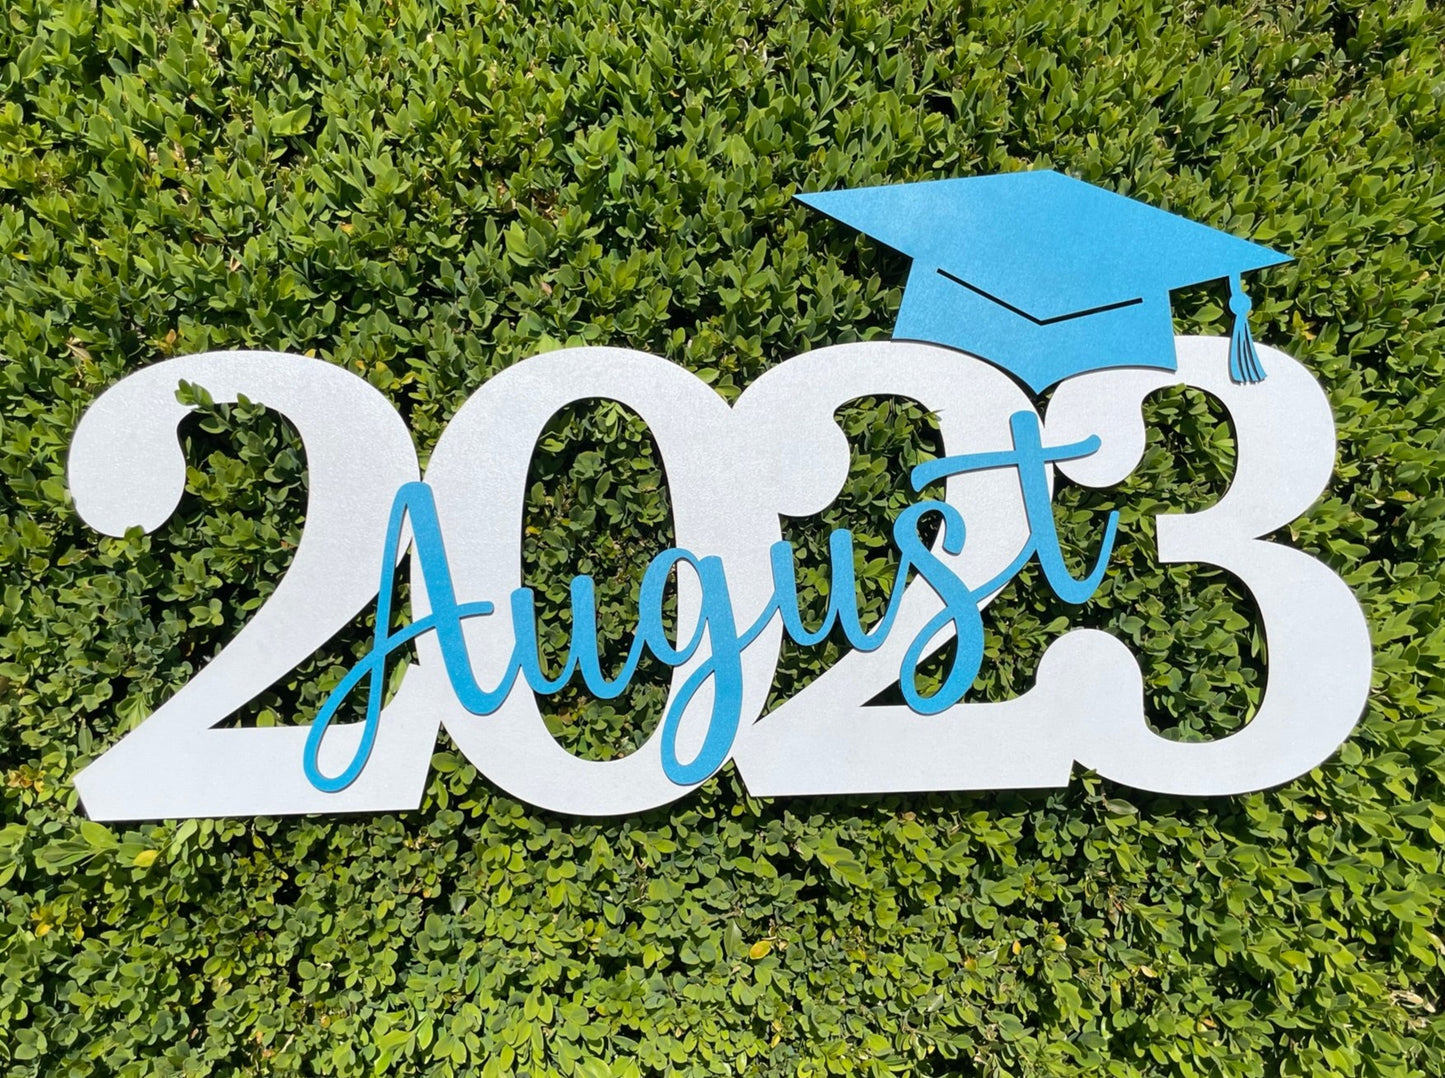 Graduation Wood Sign with Year and Name